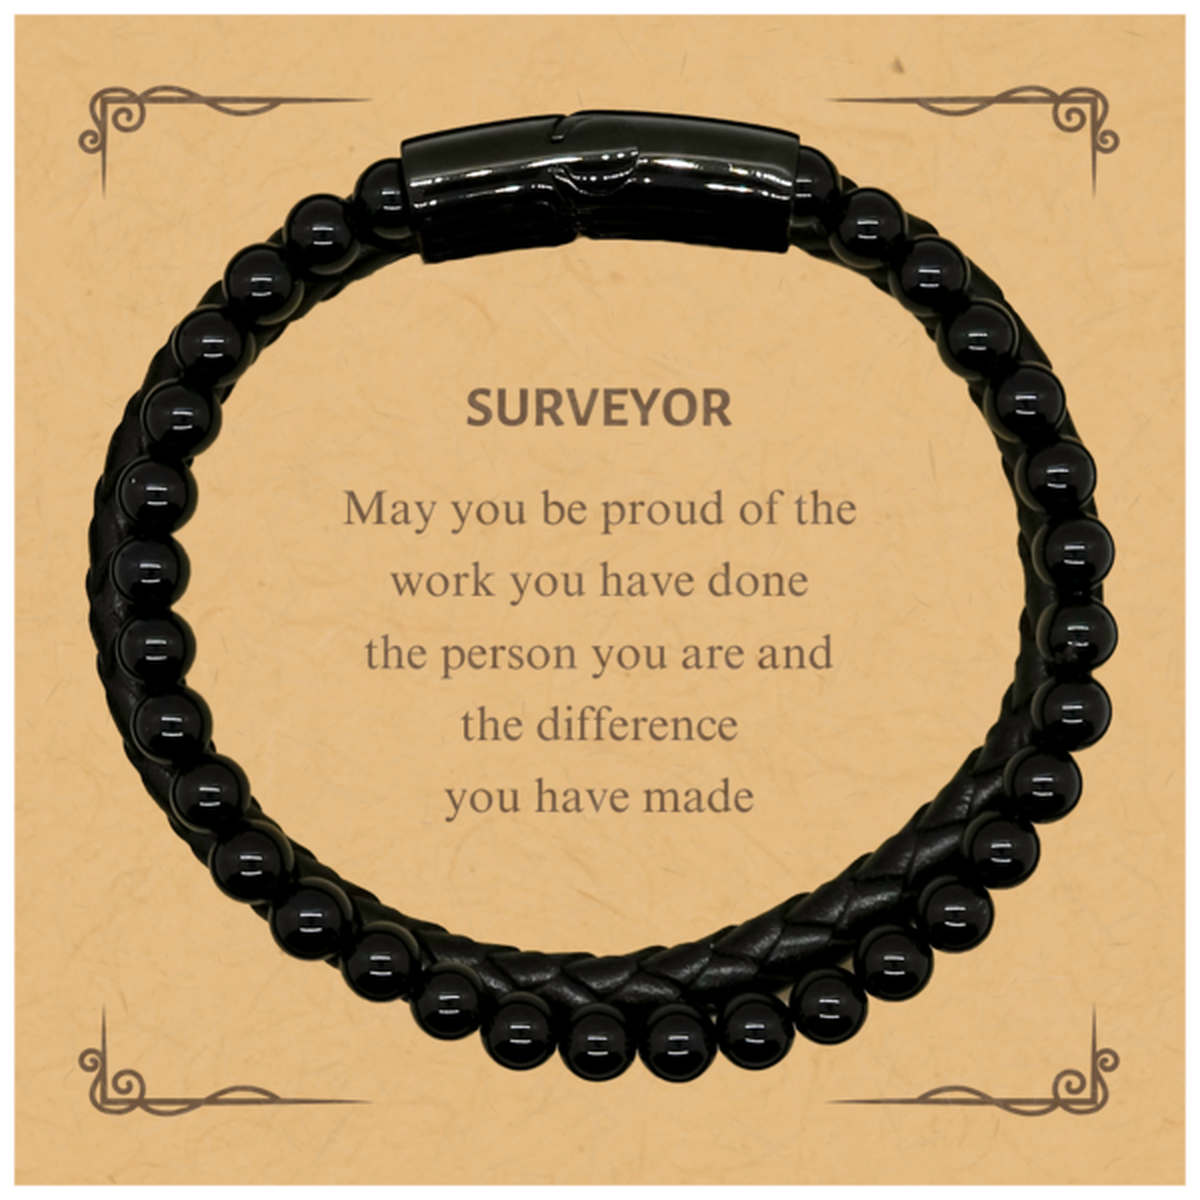 Surveyor May you be proud of the work you have done, Retirement Surveyor Stone Leather Bracelets for Colleague Appreciation Gifts Amazing for Surveyor